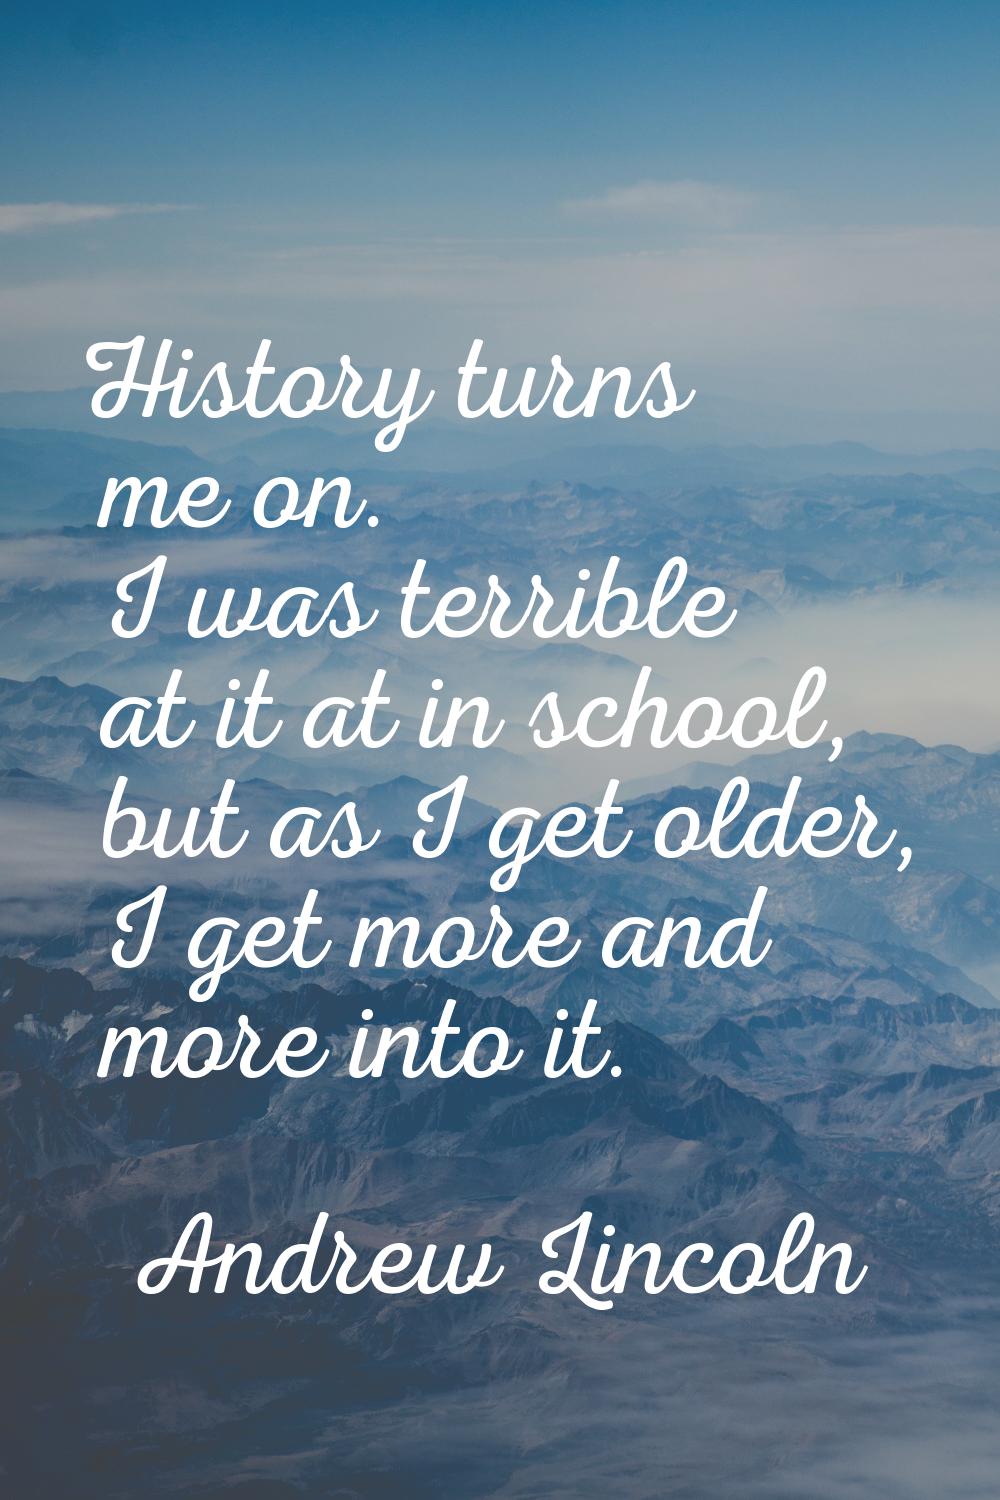 History turns me on. I was terrible at it at in school, but as I get older, I get more and more int